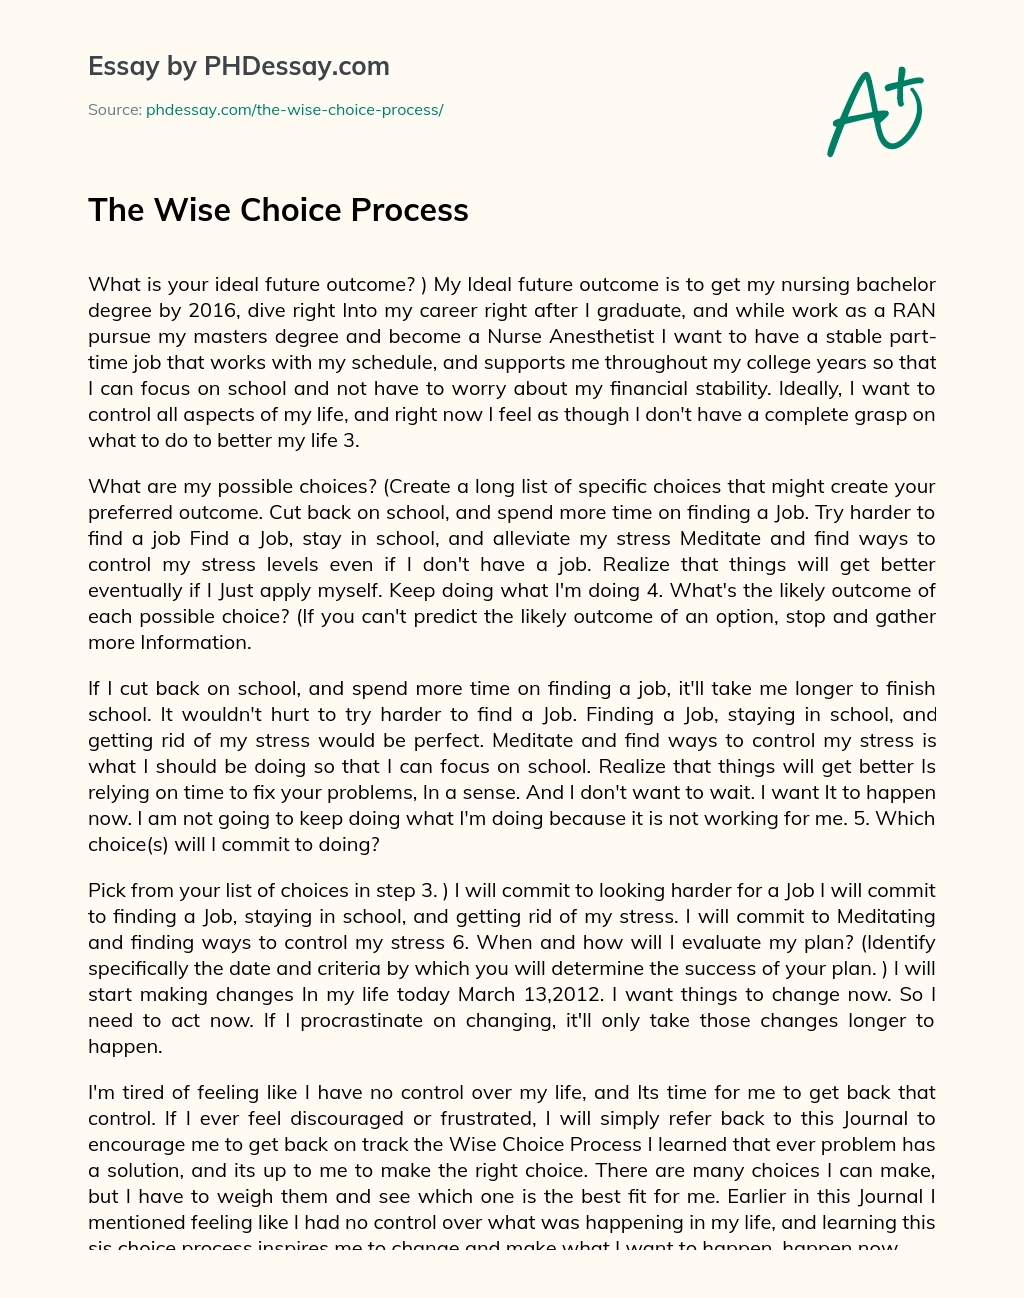 The Wise Choice Process essay